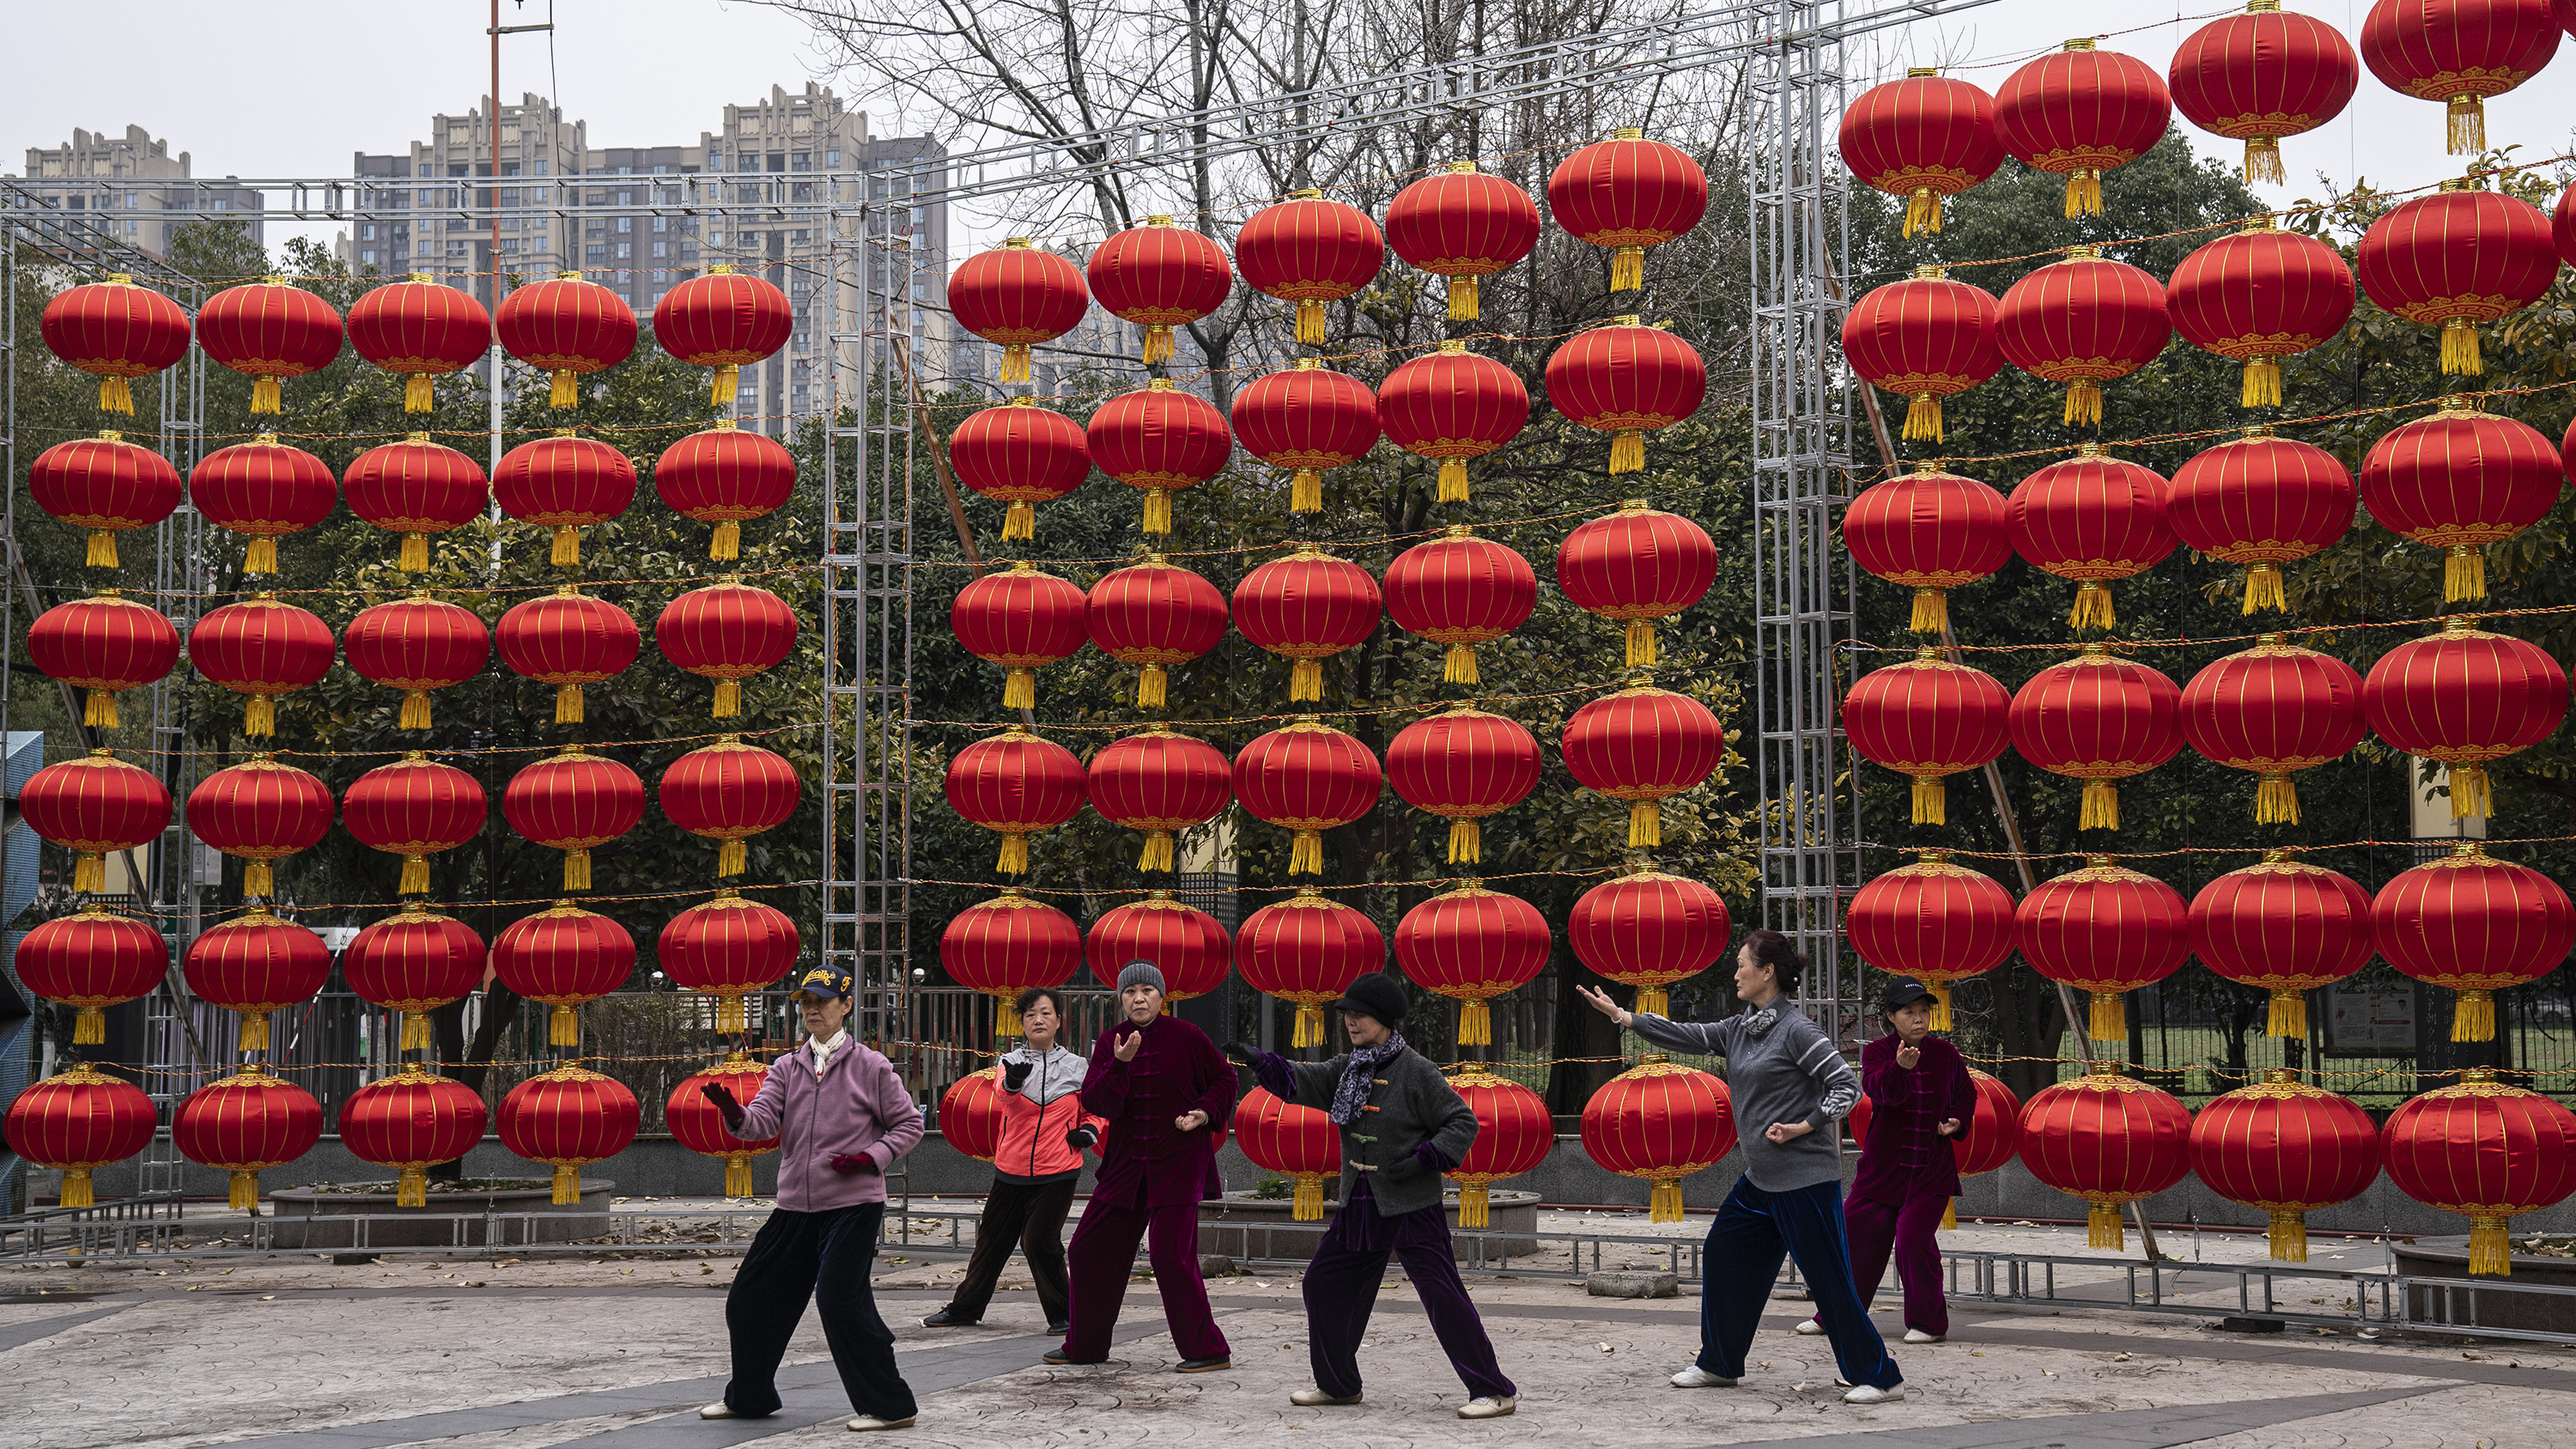 What is Lunar New Year and how is it celebrated in Australia?